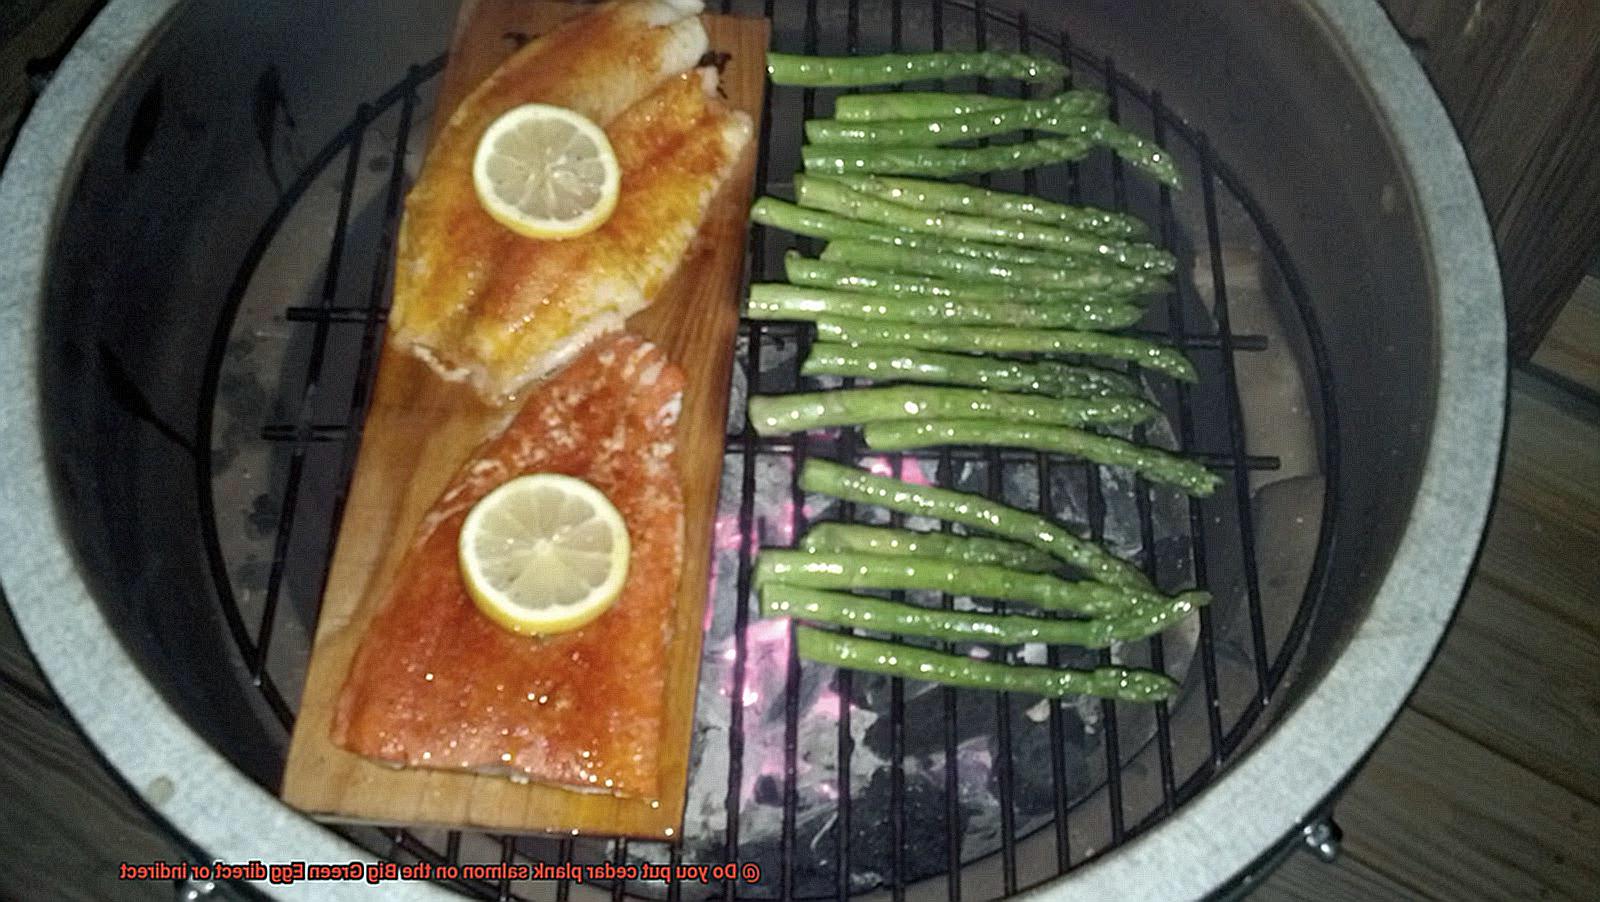 Do you put cedar plank salmon on the Big Green Egg direct or indirect-5